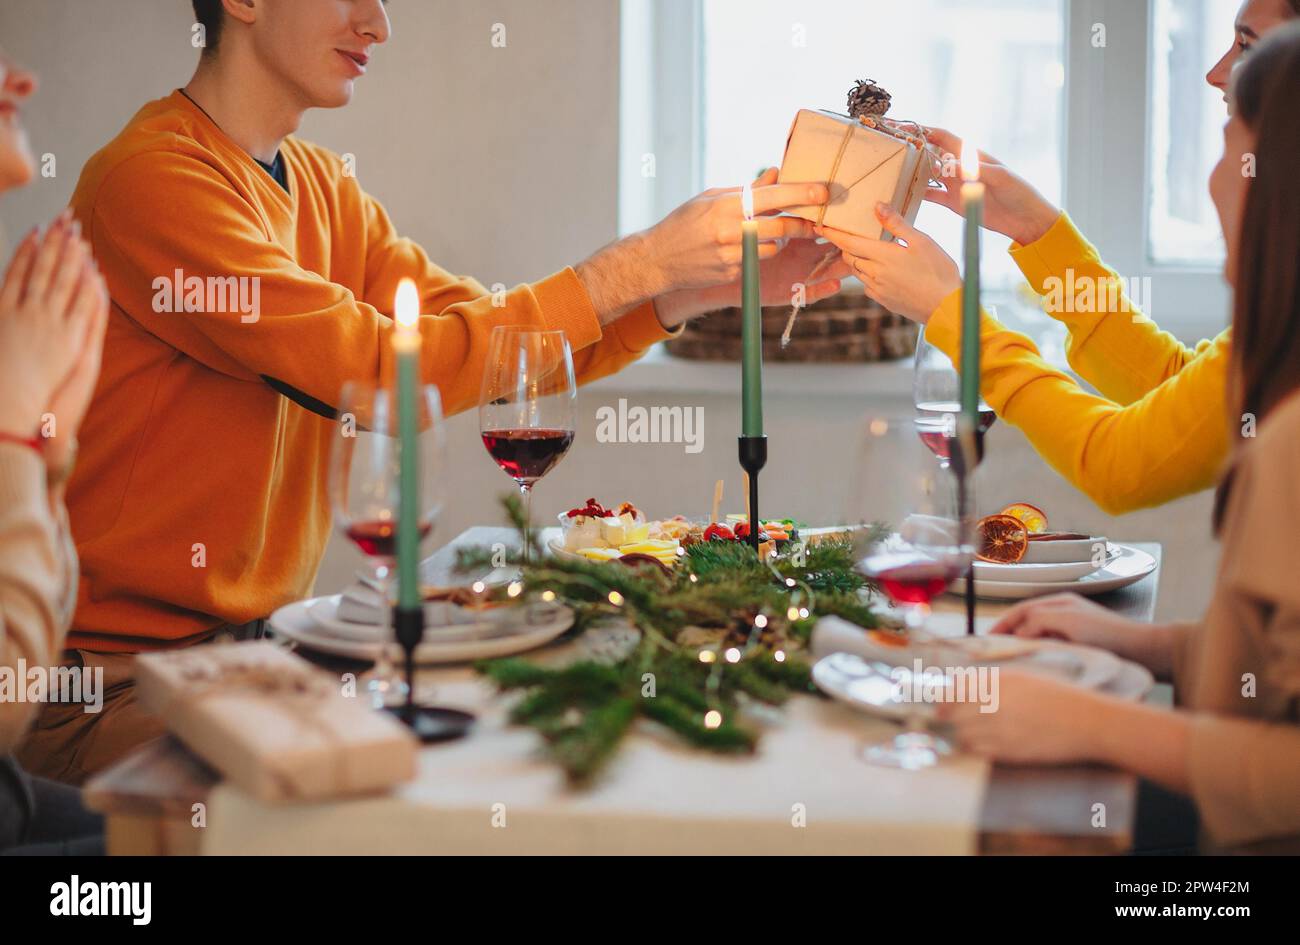 Happy person giving wrapped gift to friend while sitting at table and celebrating Christmas together Stock Photo